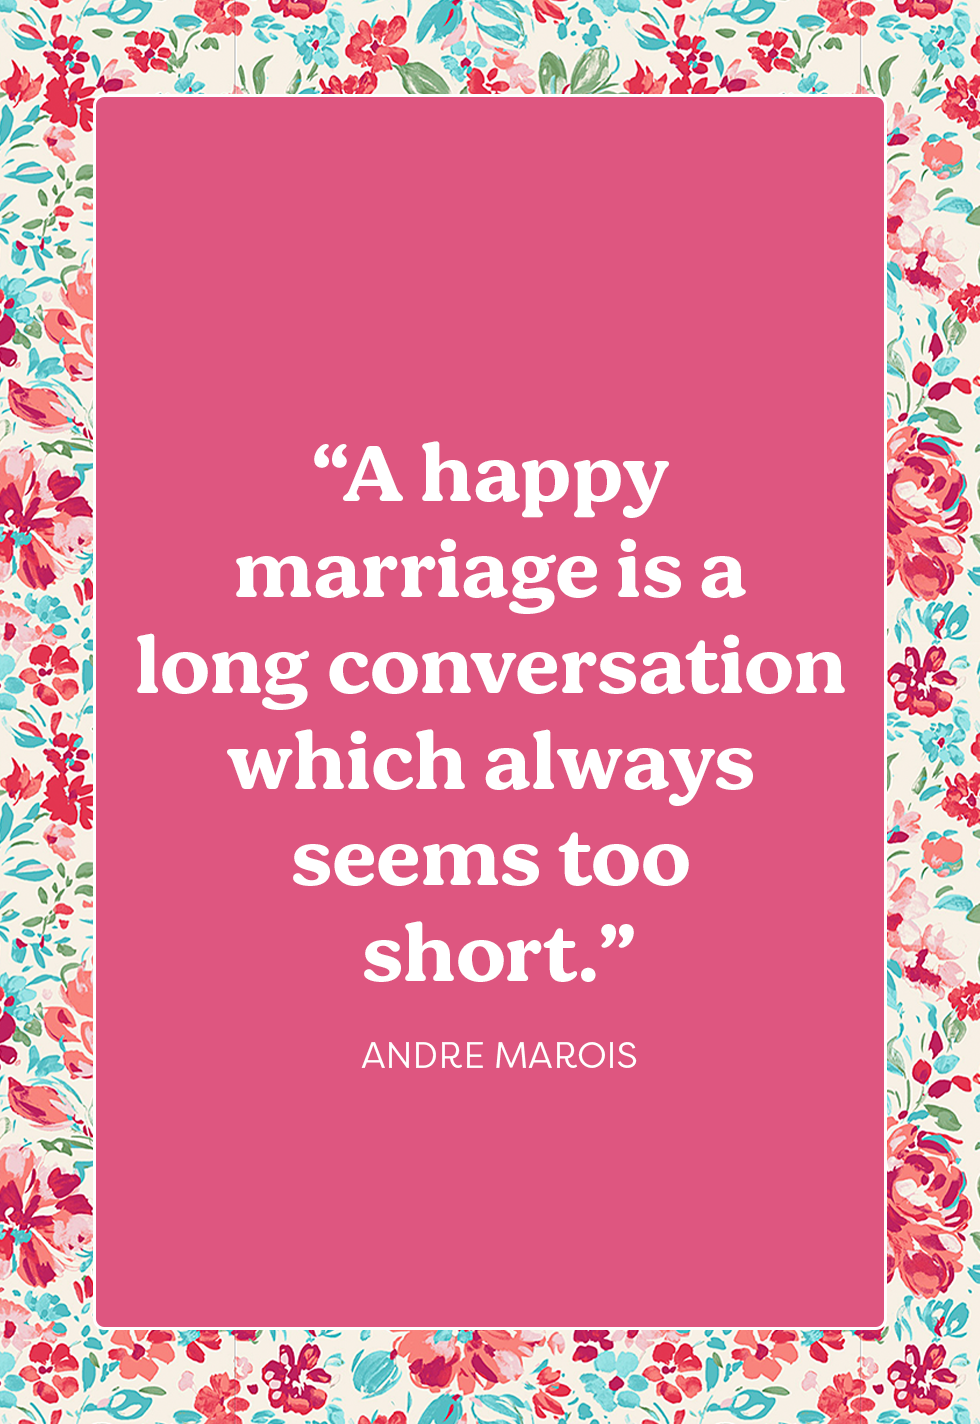 25 Marriage Quotes - Best Quotes and Sayings About Marriage